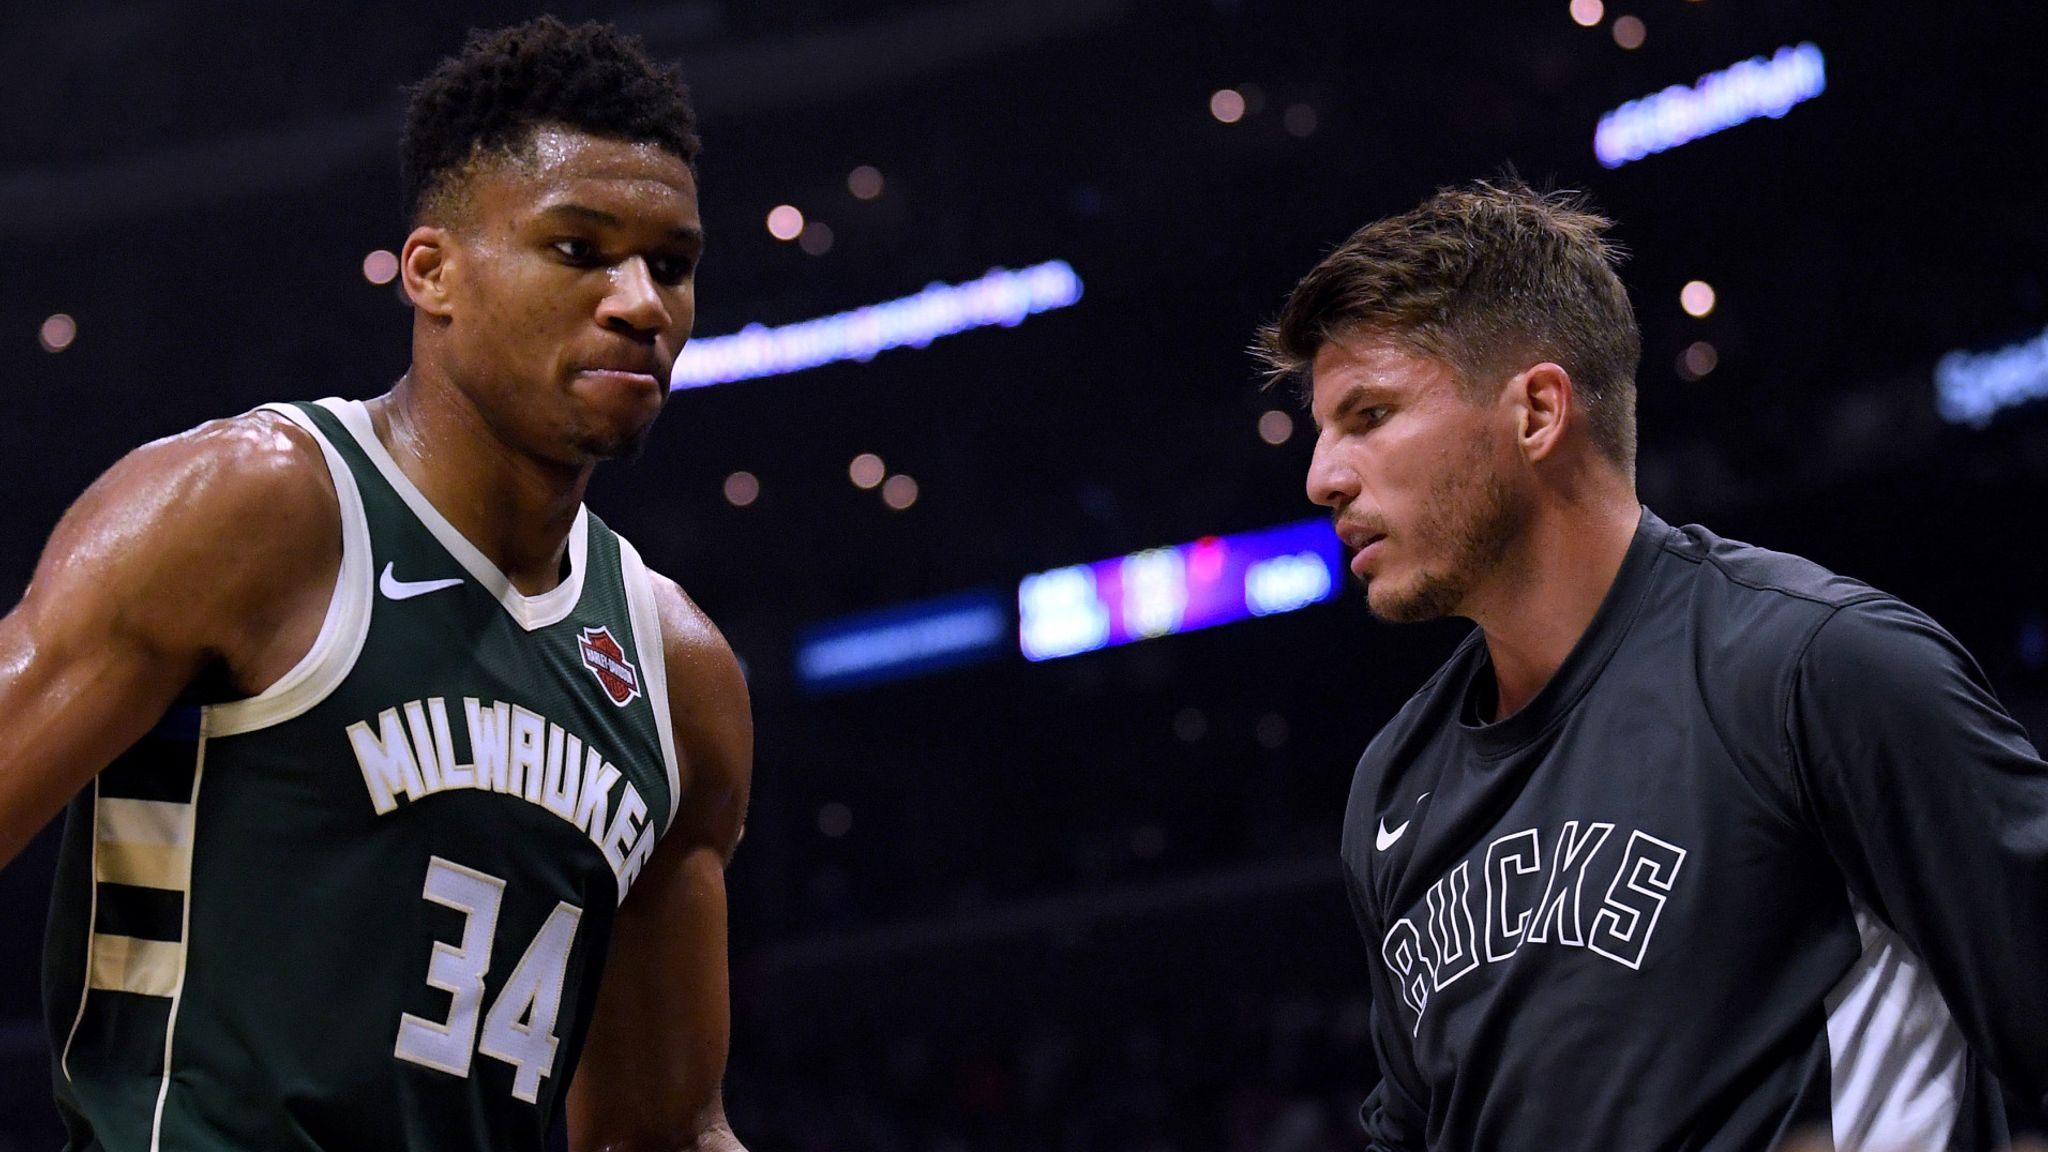 Giannis Antetokounmpo Is 'Taking His Talents' To NFL Team